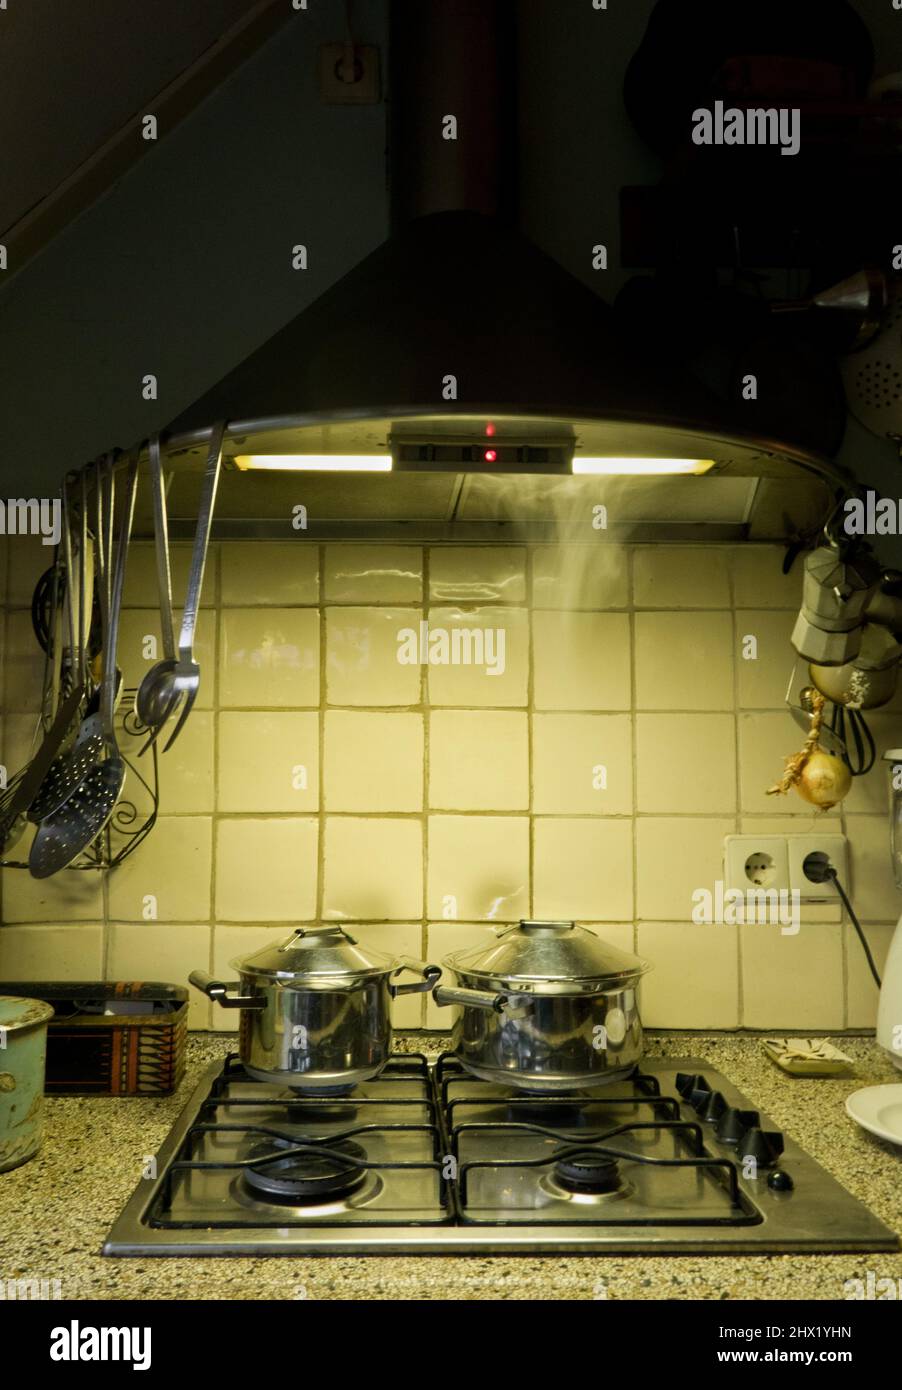 Meal preparation in the evening: pans on gas stove in kitchen by lamplight Stock Photo